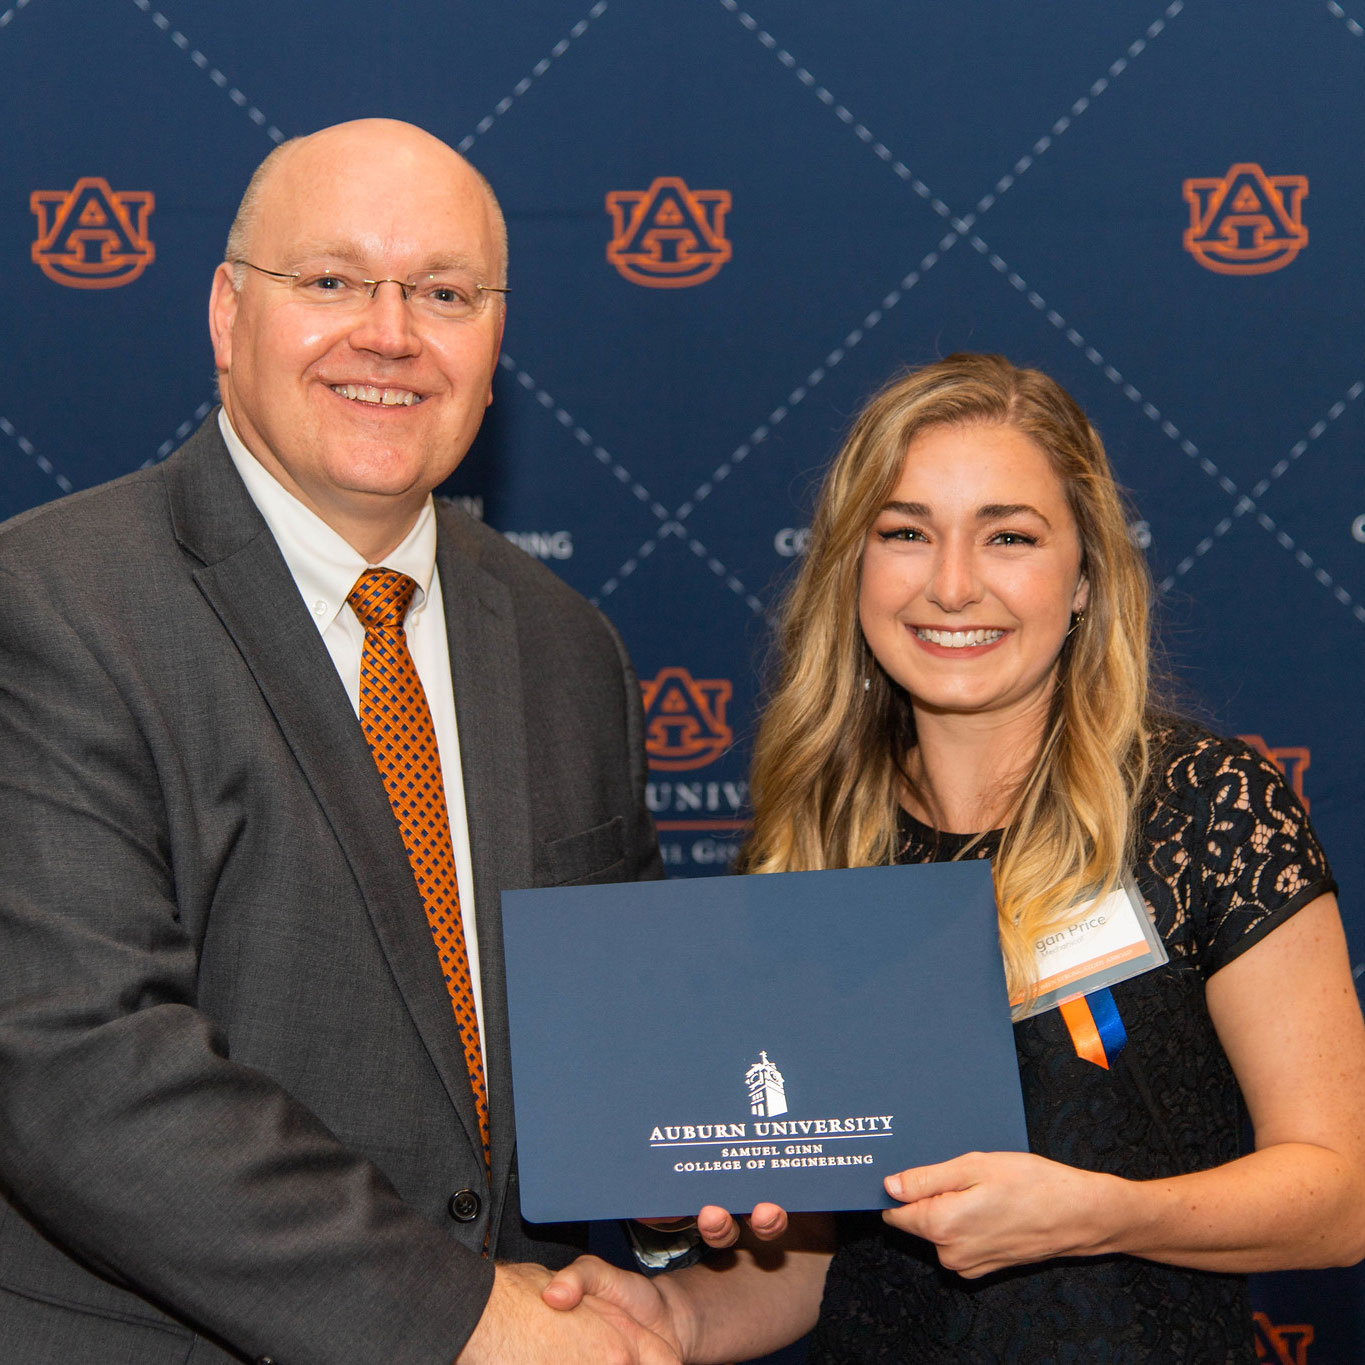 Morgan Price, a graduate student in mechanical engineering, received a 100+ Women Strong Study Abroad Award. She is pictured with Dean Christopher B. Roberts.